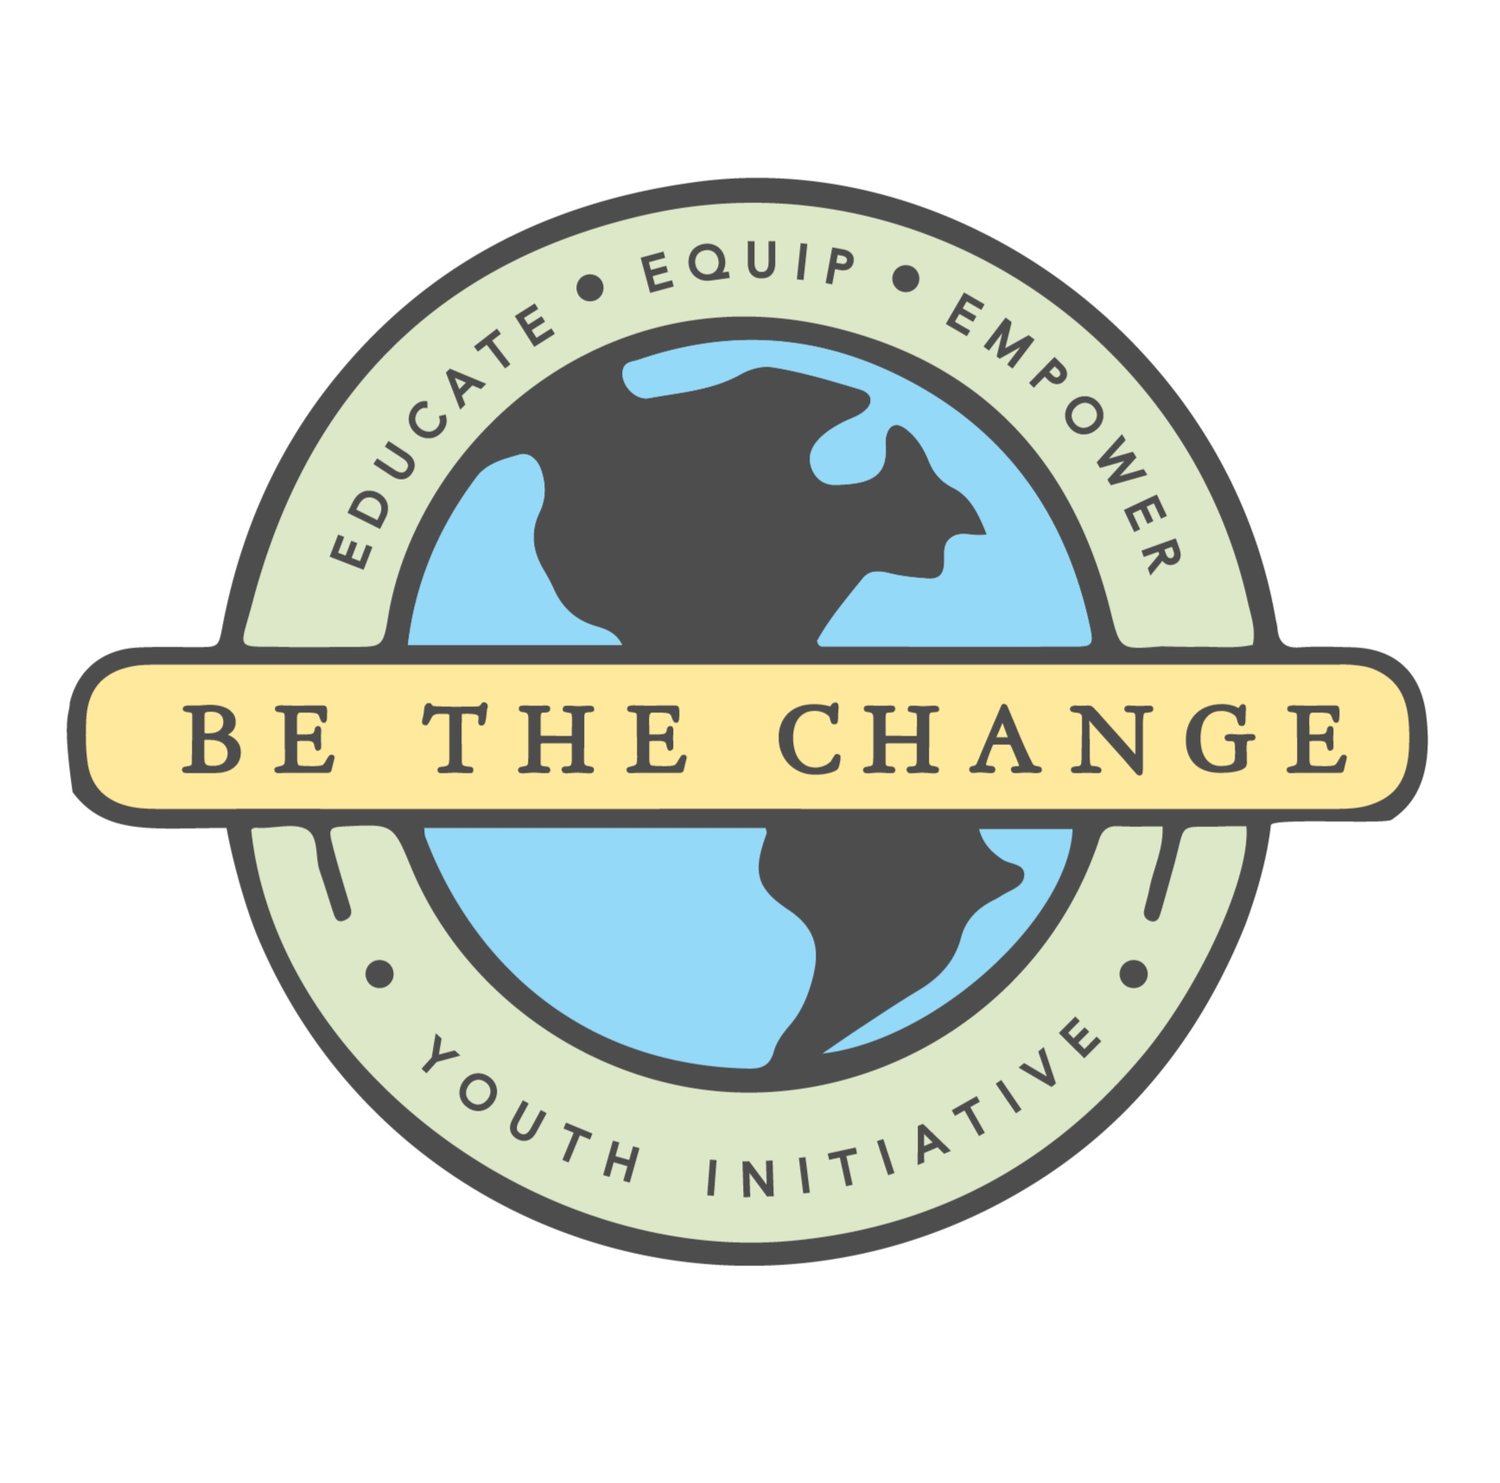 Be The Change Youth Initiative